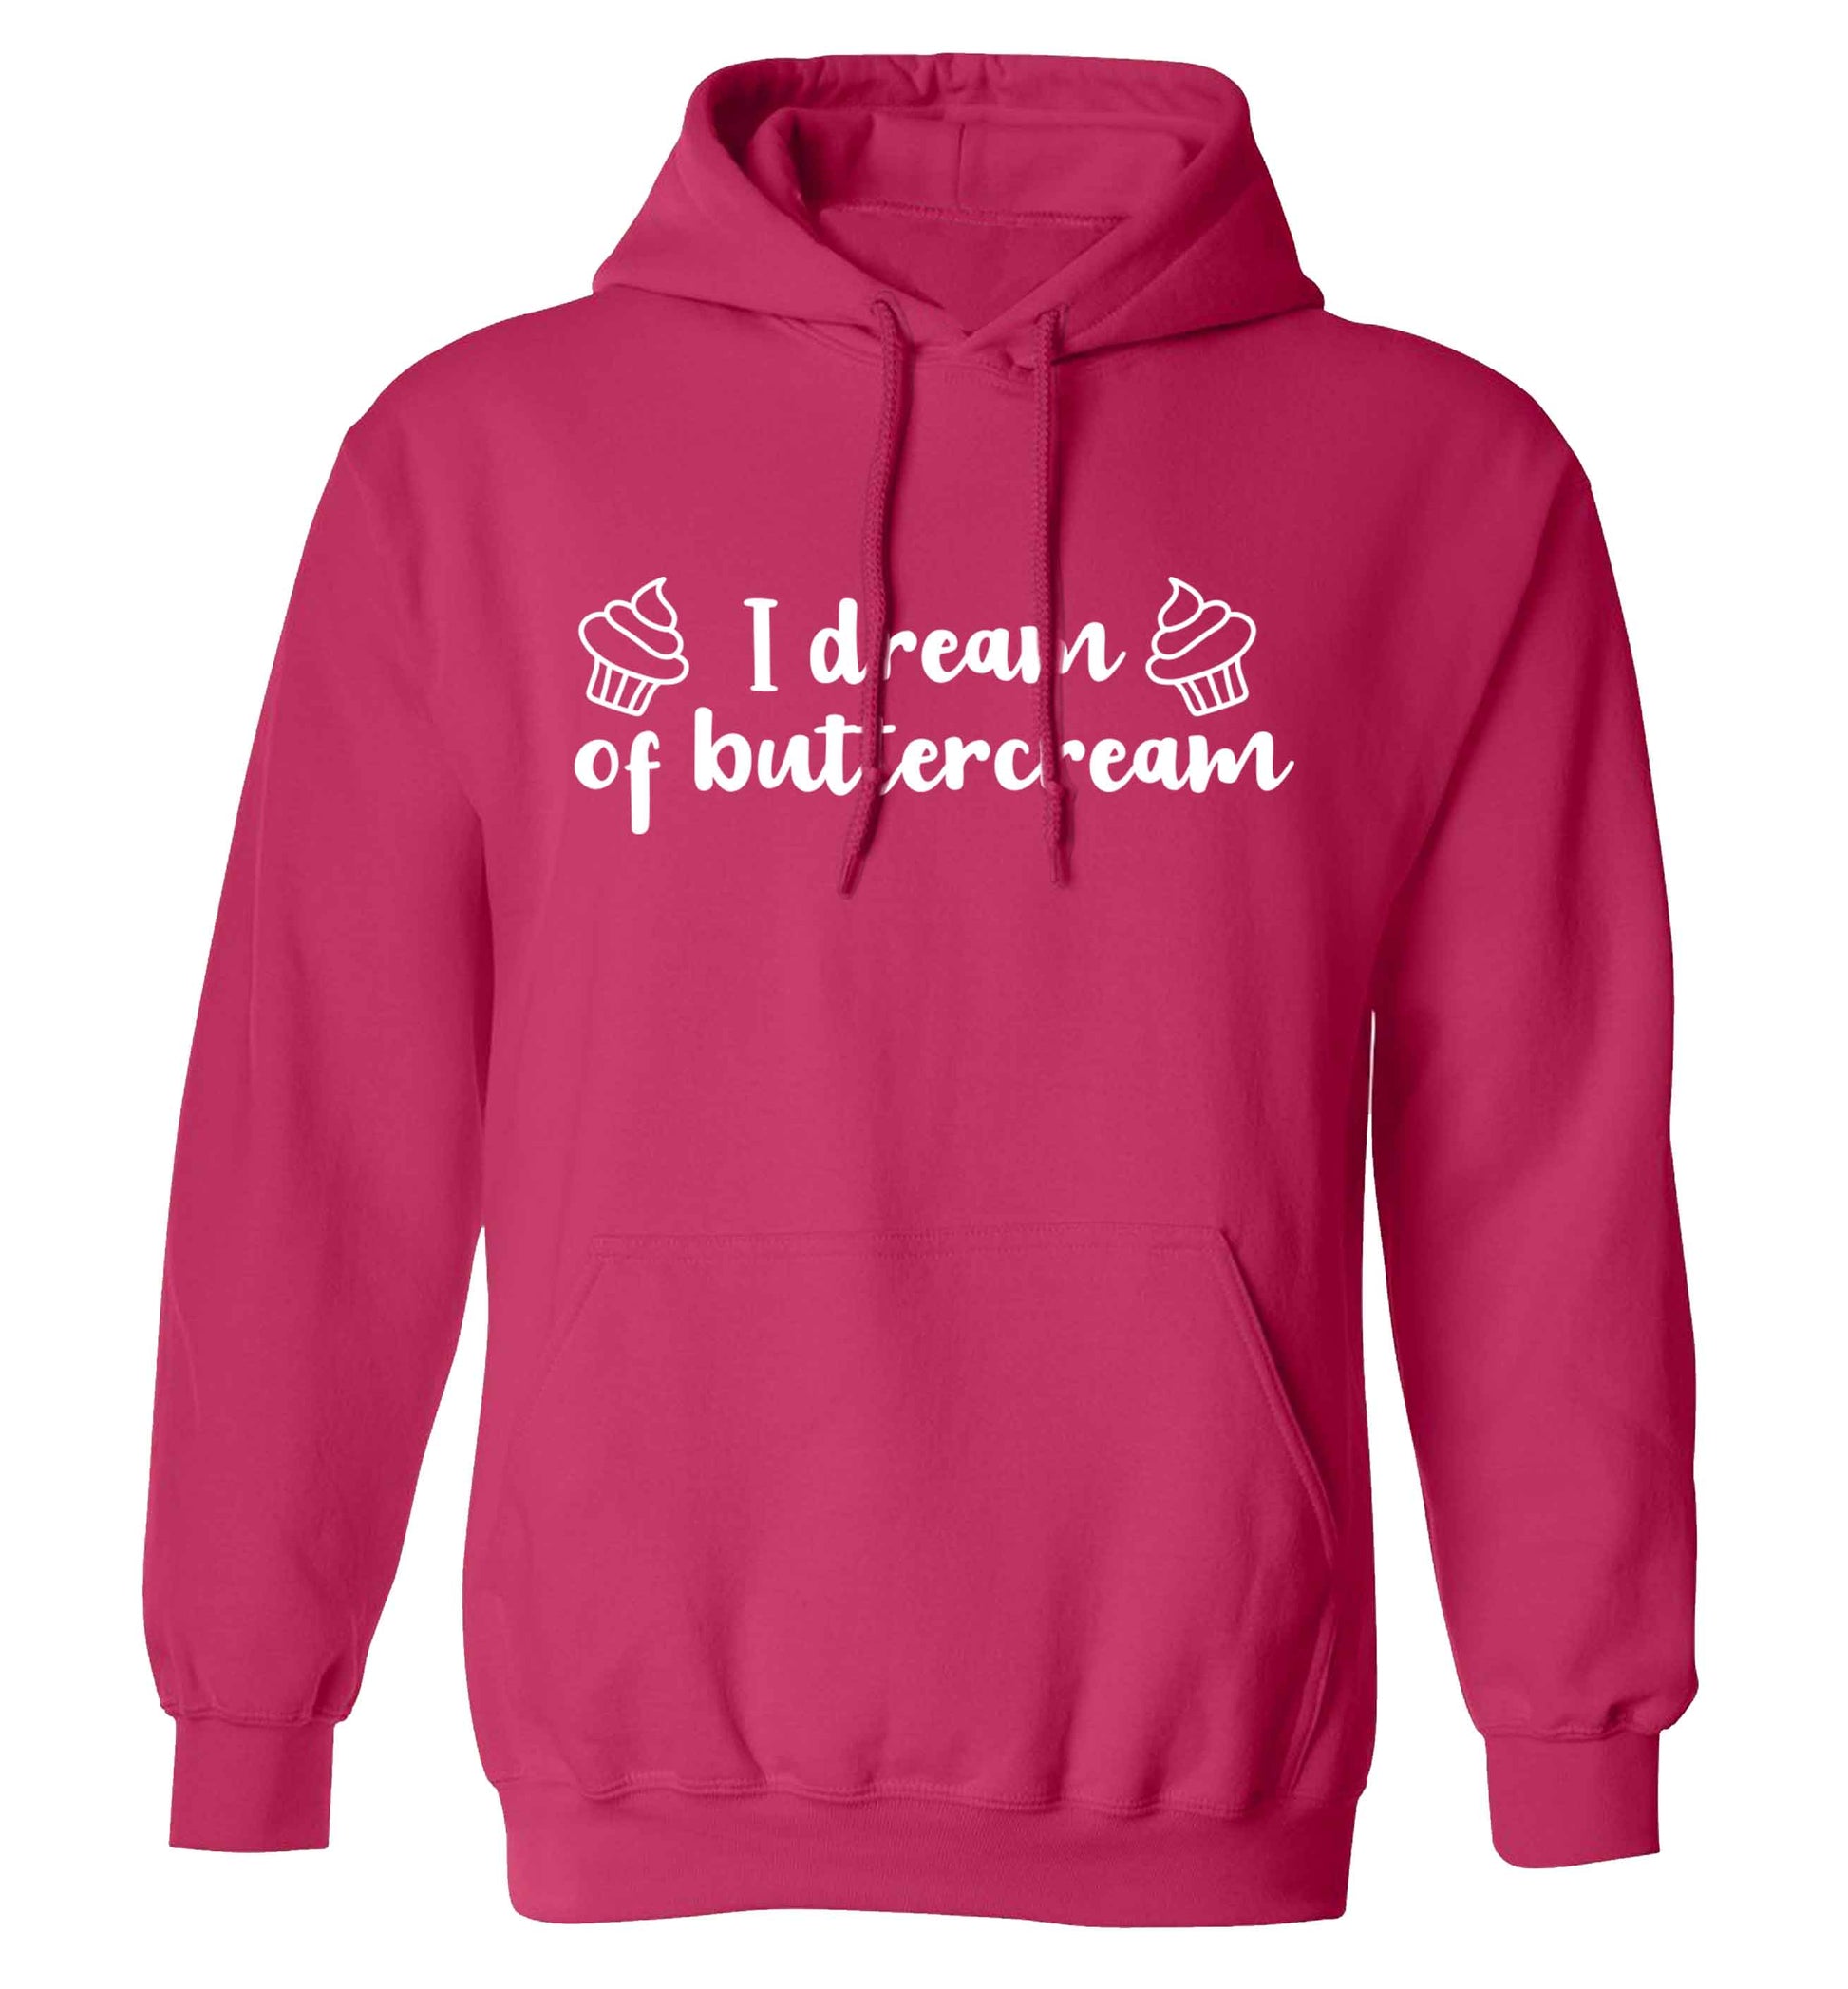 I dream of buttercream adults unisex pink hoodie 2XL